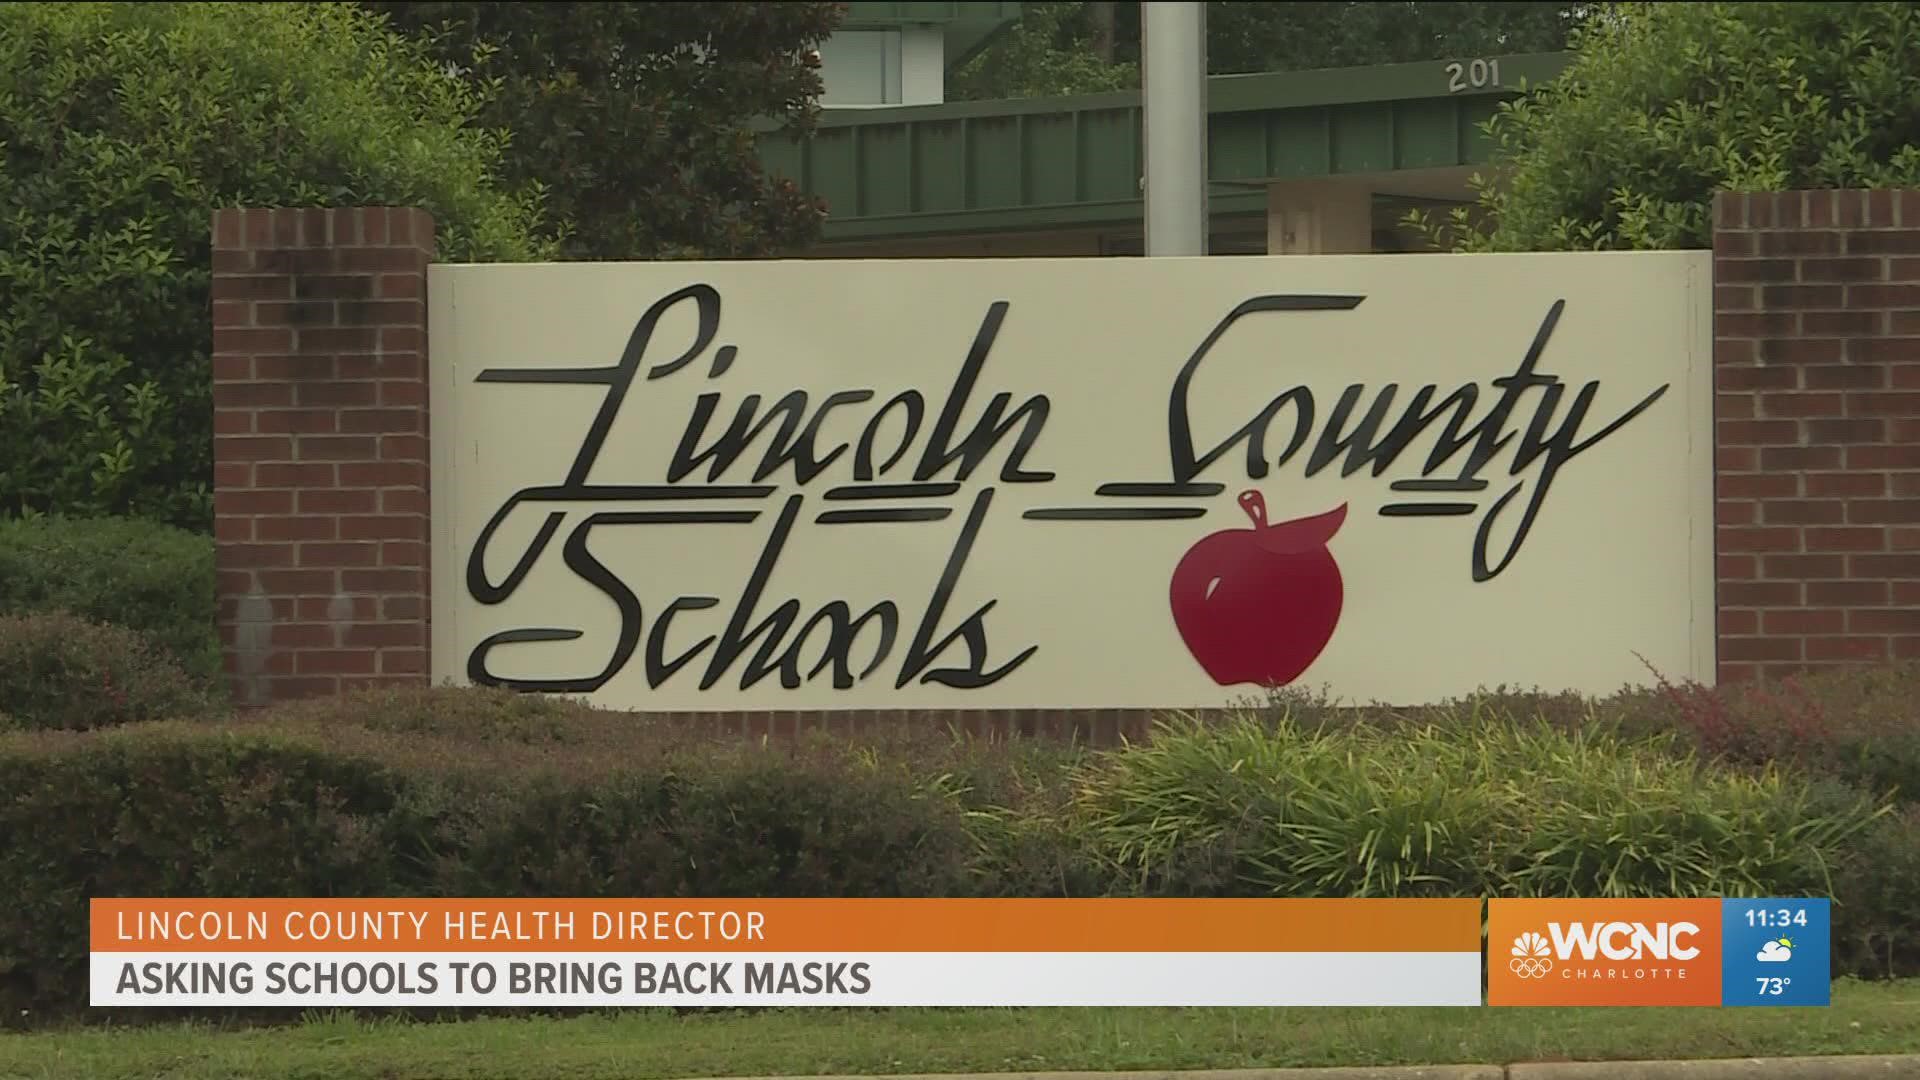 Health leaders in Lincoln County are asking school district leaders to require masks for all students and staff due to rising COVID-19.